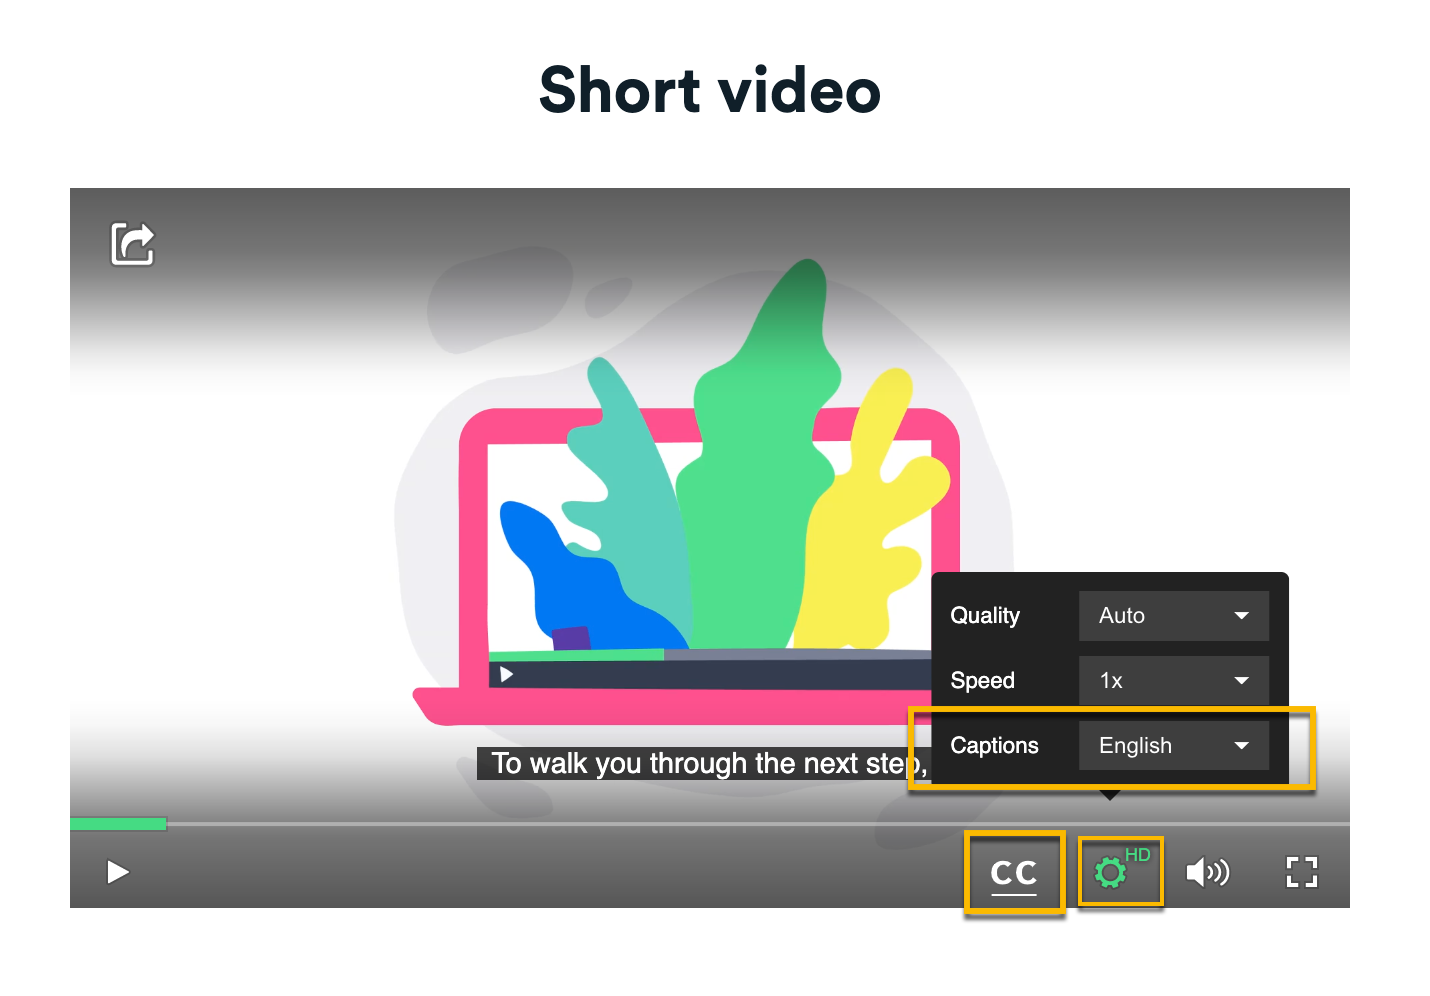 Video player with captions, caption button enabled and settings window open showing language options